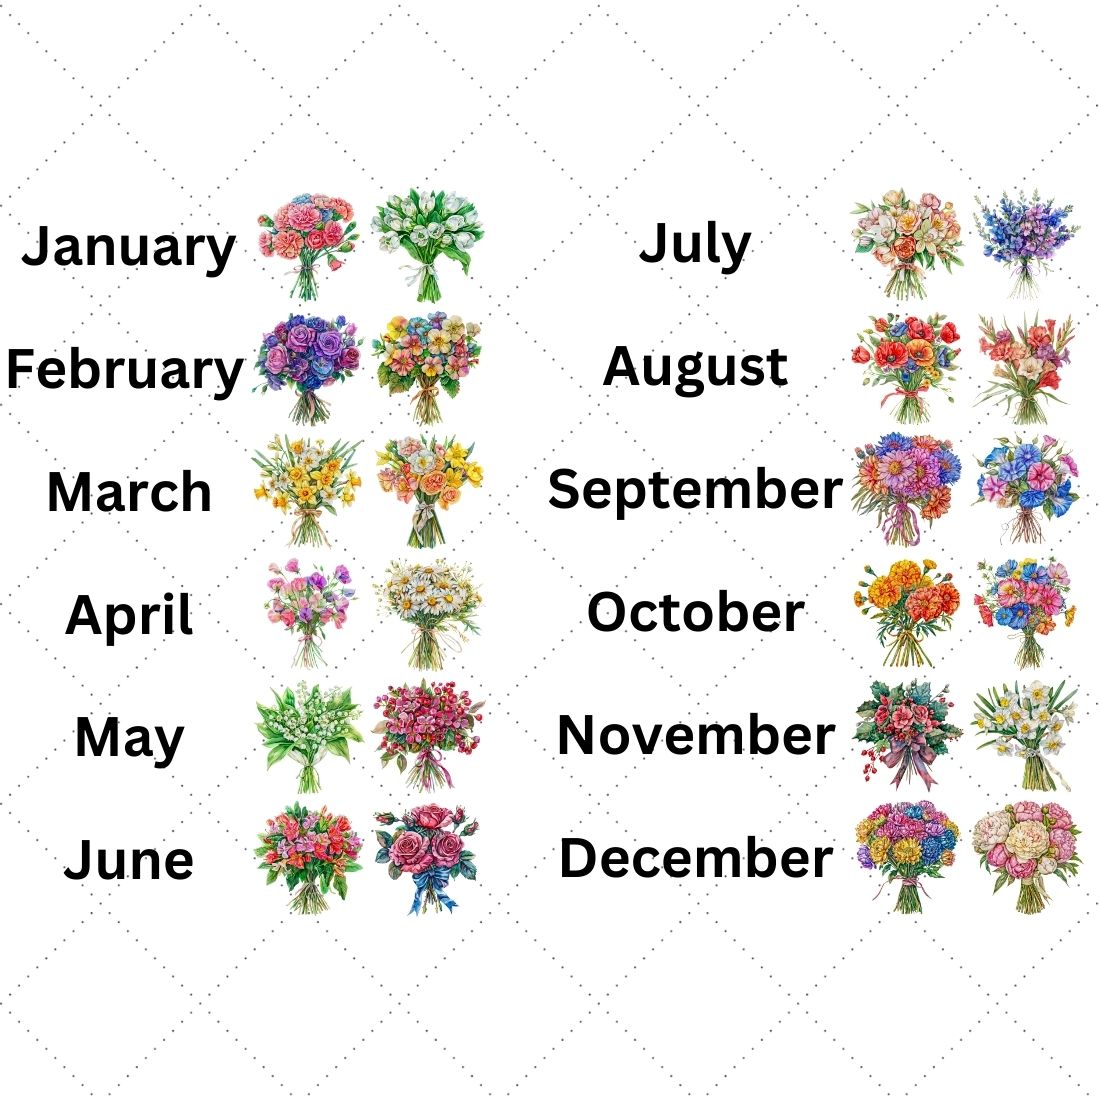 Birth Flower bouquet PNG Birth month Clipart Watercolor & Vintage style birth month flowers clipart illustration Birthday flower Print DIY preview image.